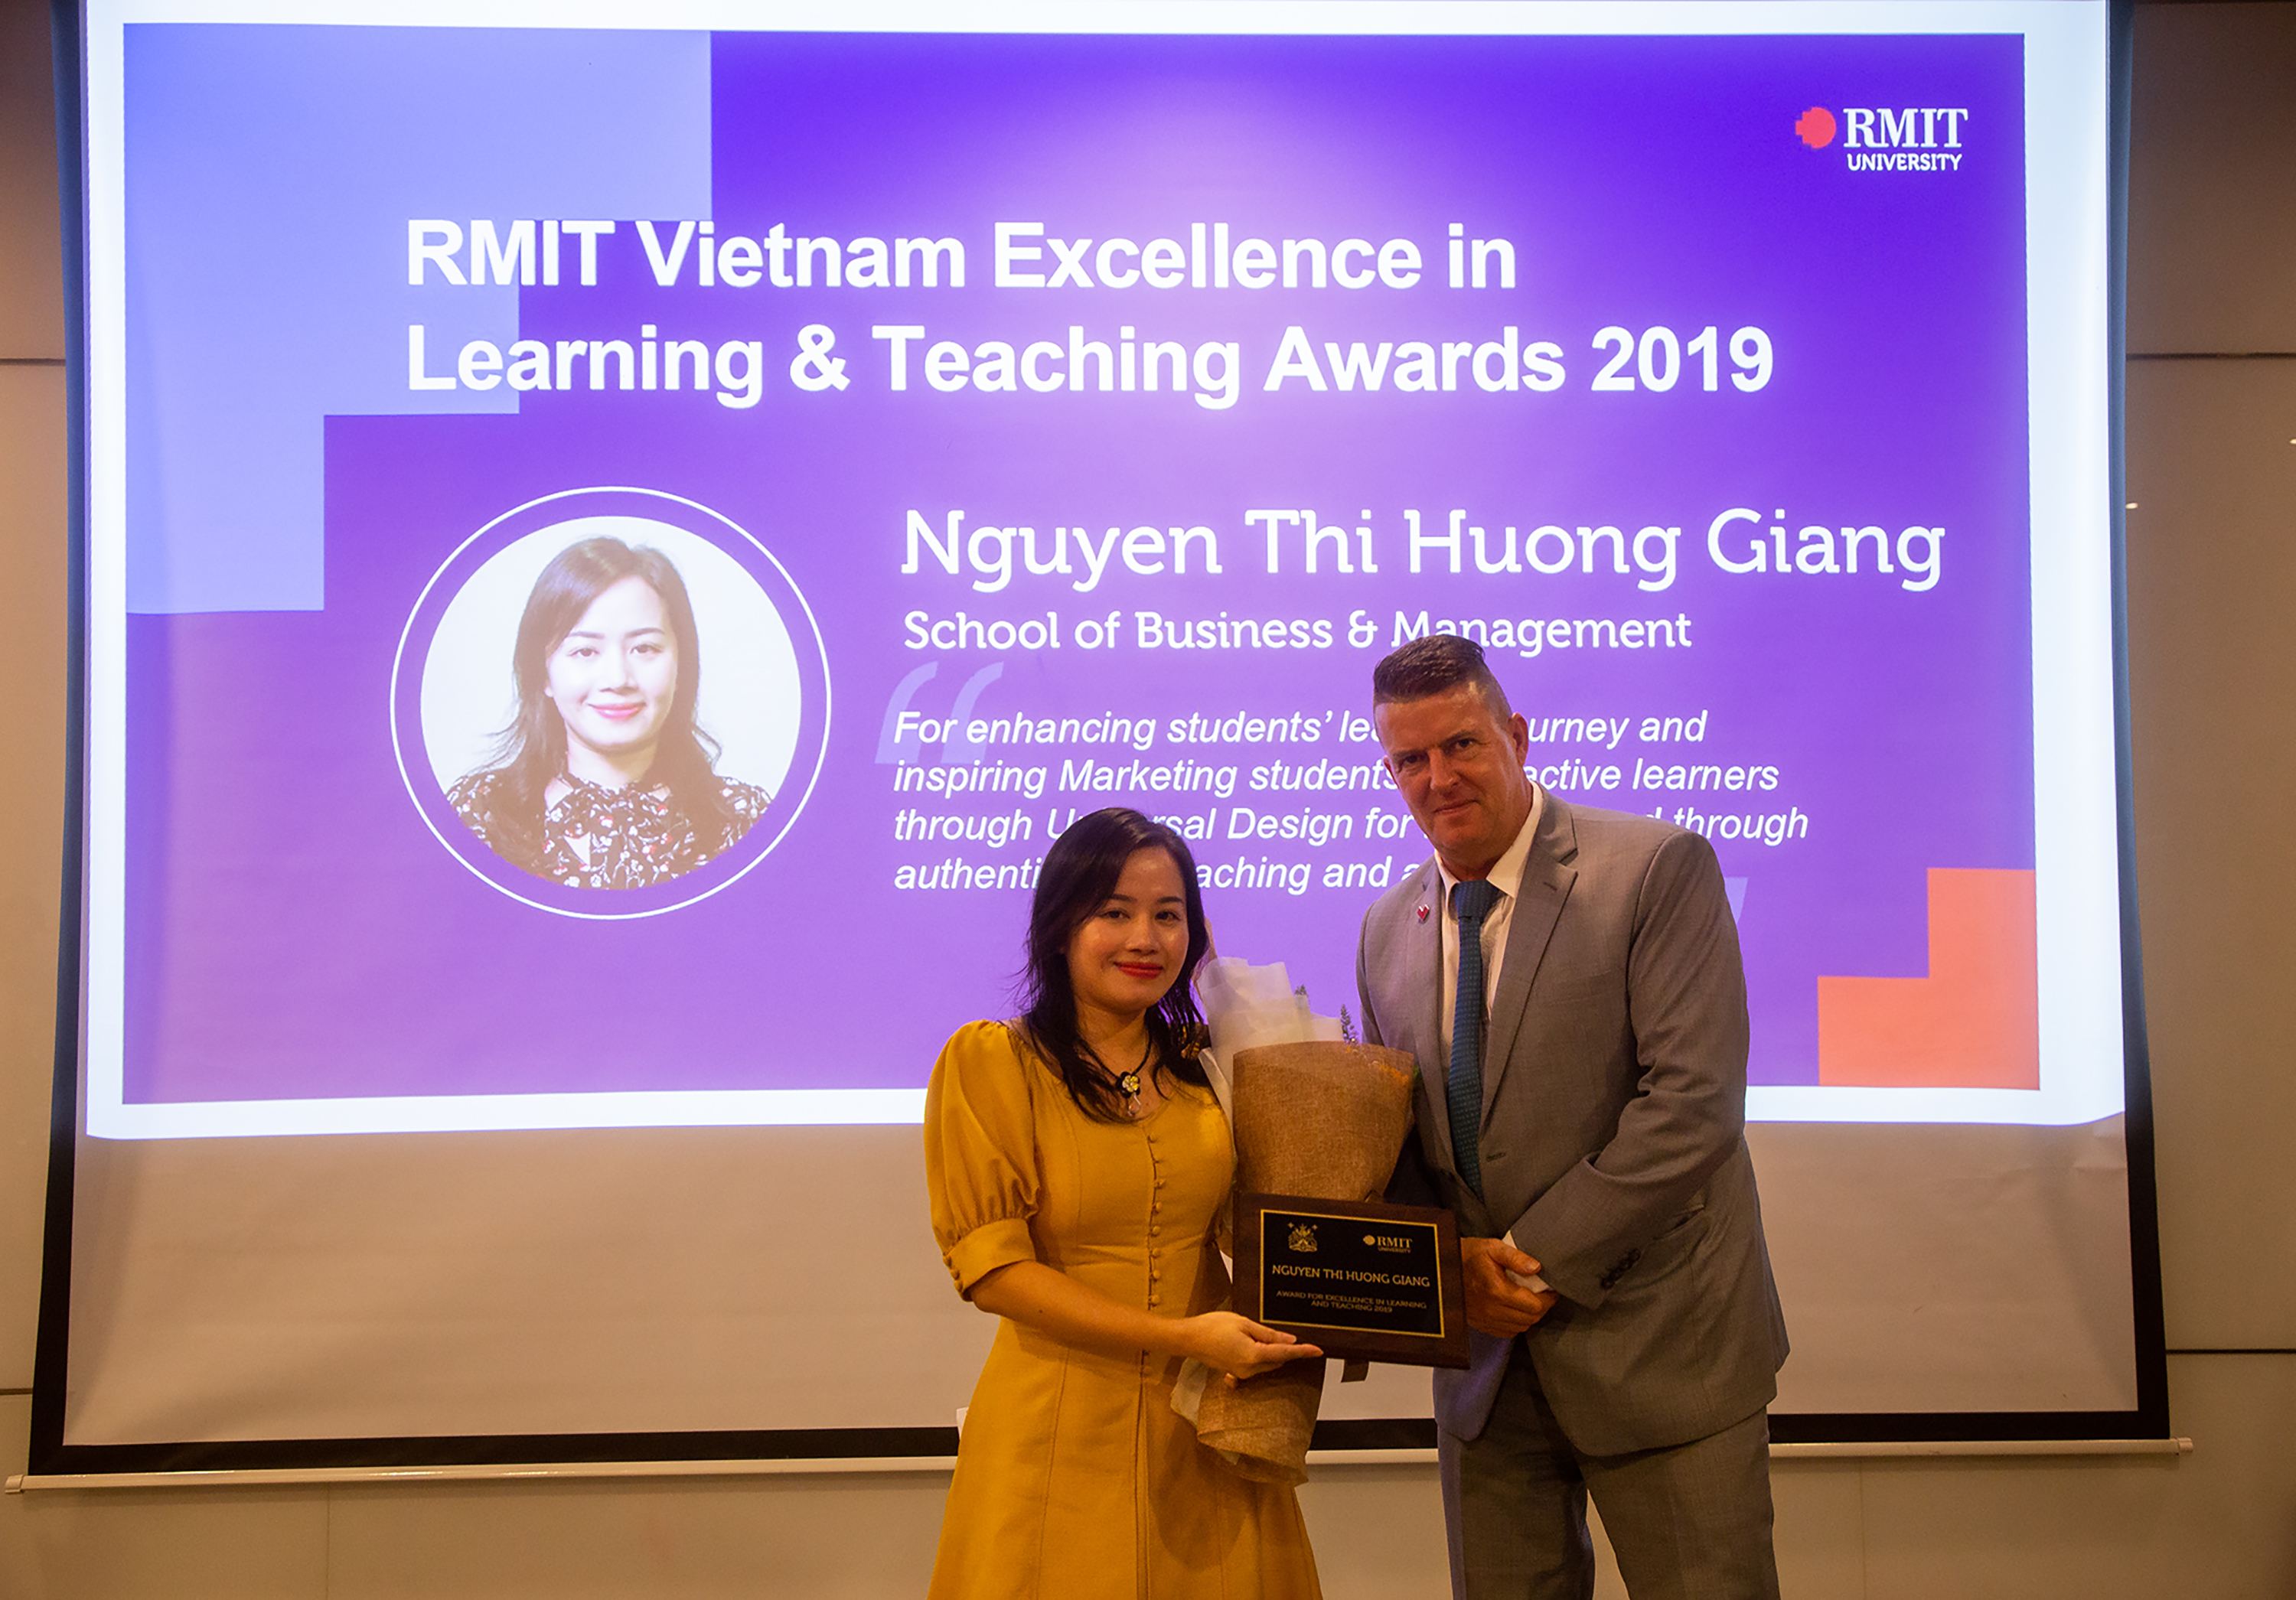 Digital Marketing Associate Lecturer Nguyen Thi Huong Giang from the School of Business & Management was presented with the Outstanding Contributions to Student Learning award for her dramatic impact on the student experience within her program. 